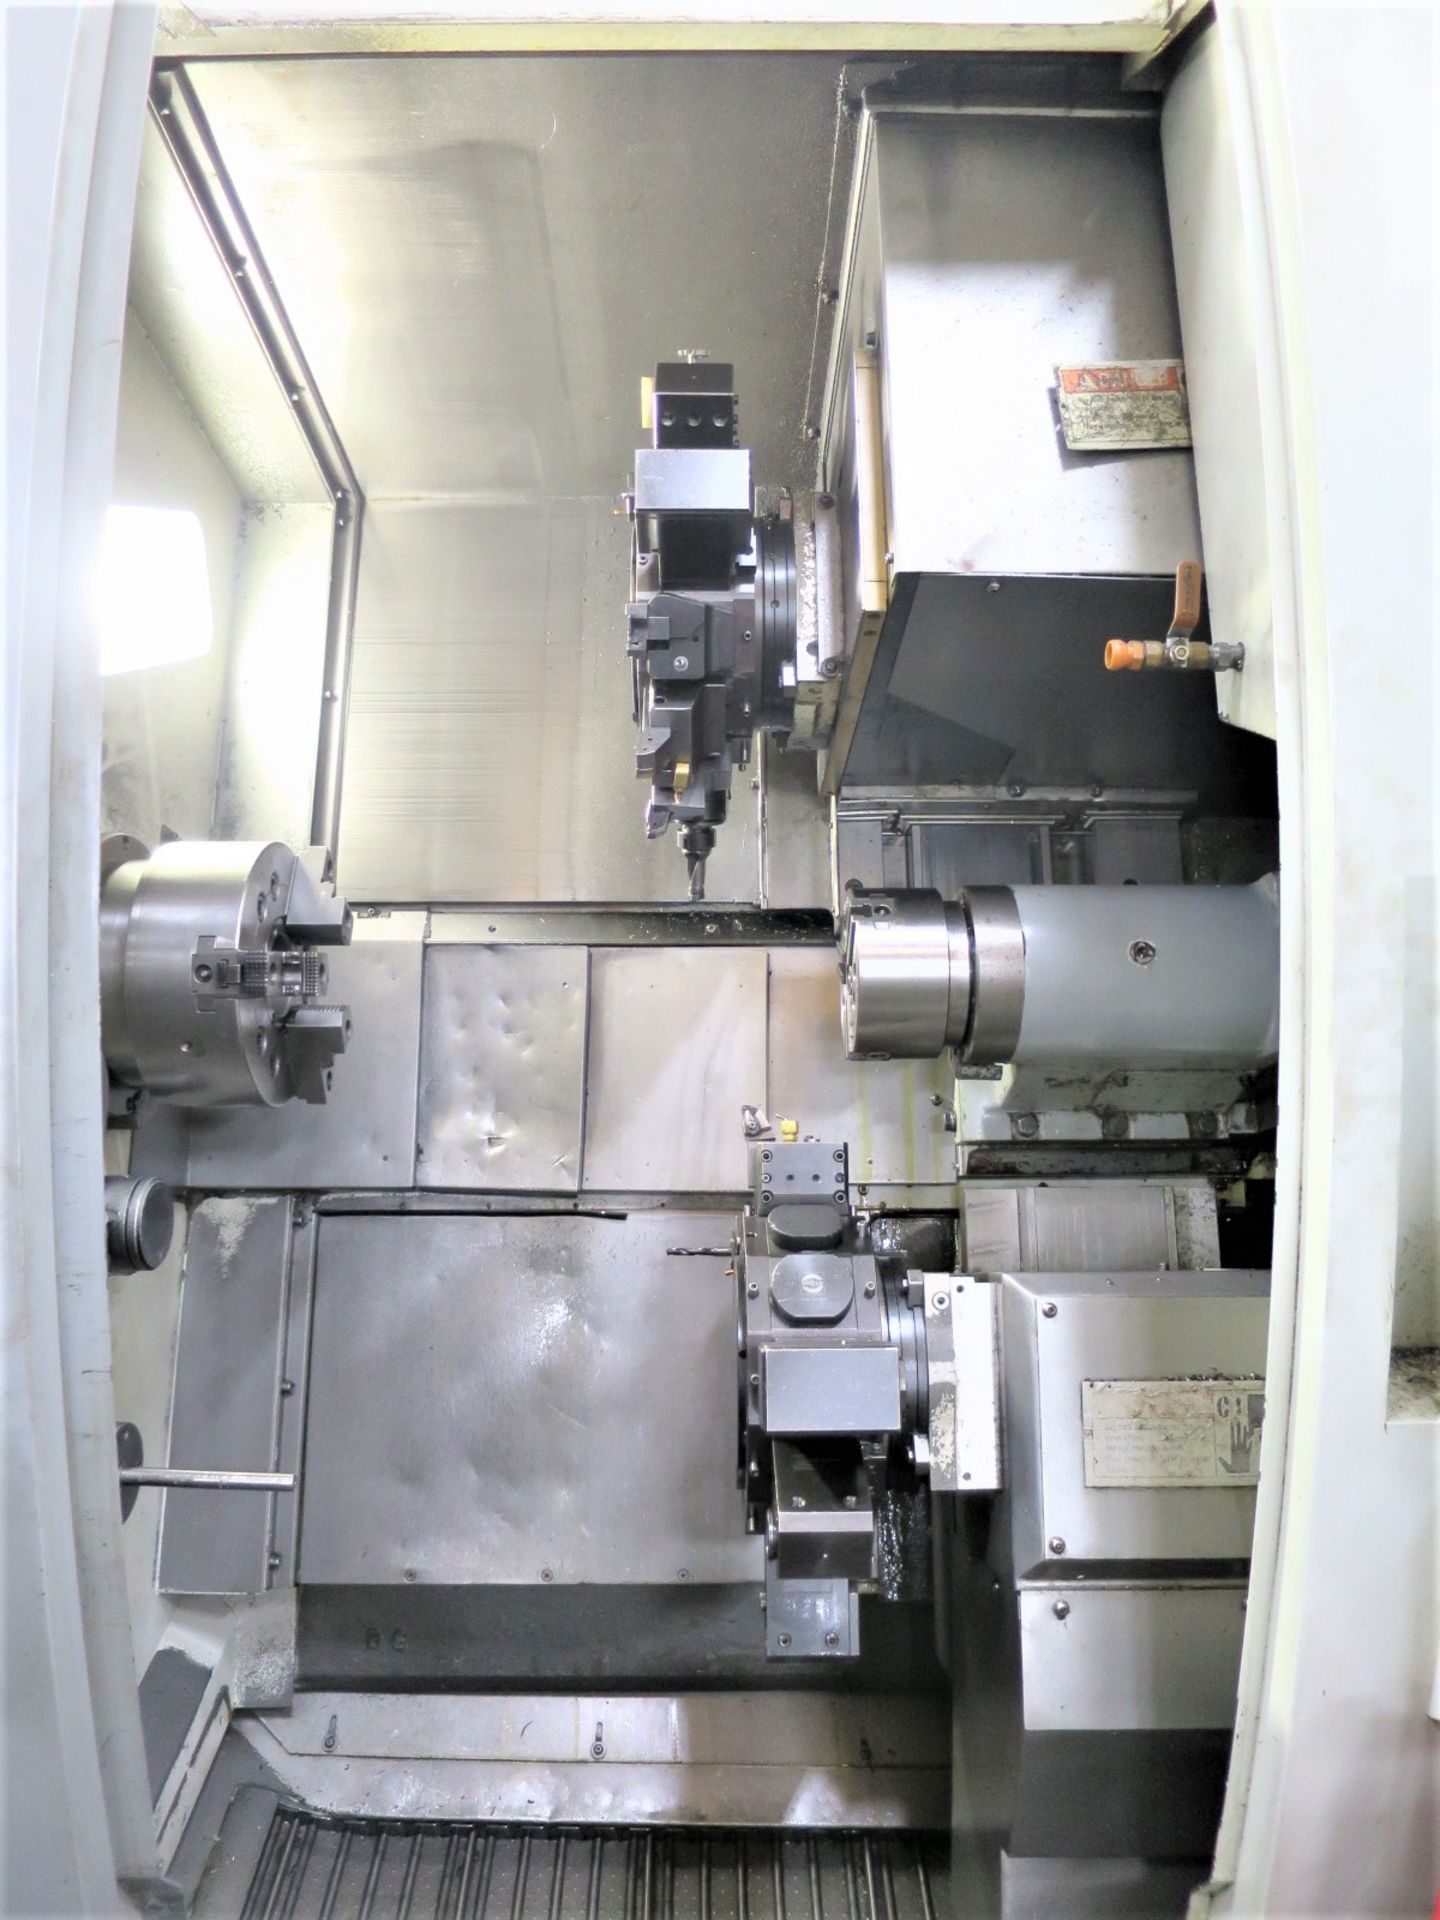 Doosan Z290-SMY Twin Spindle Twin Turret CNC Lathe w/Milling & Y-Axis, New 2006 - Image 4 of 10